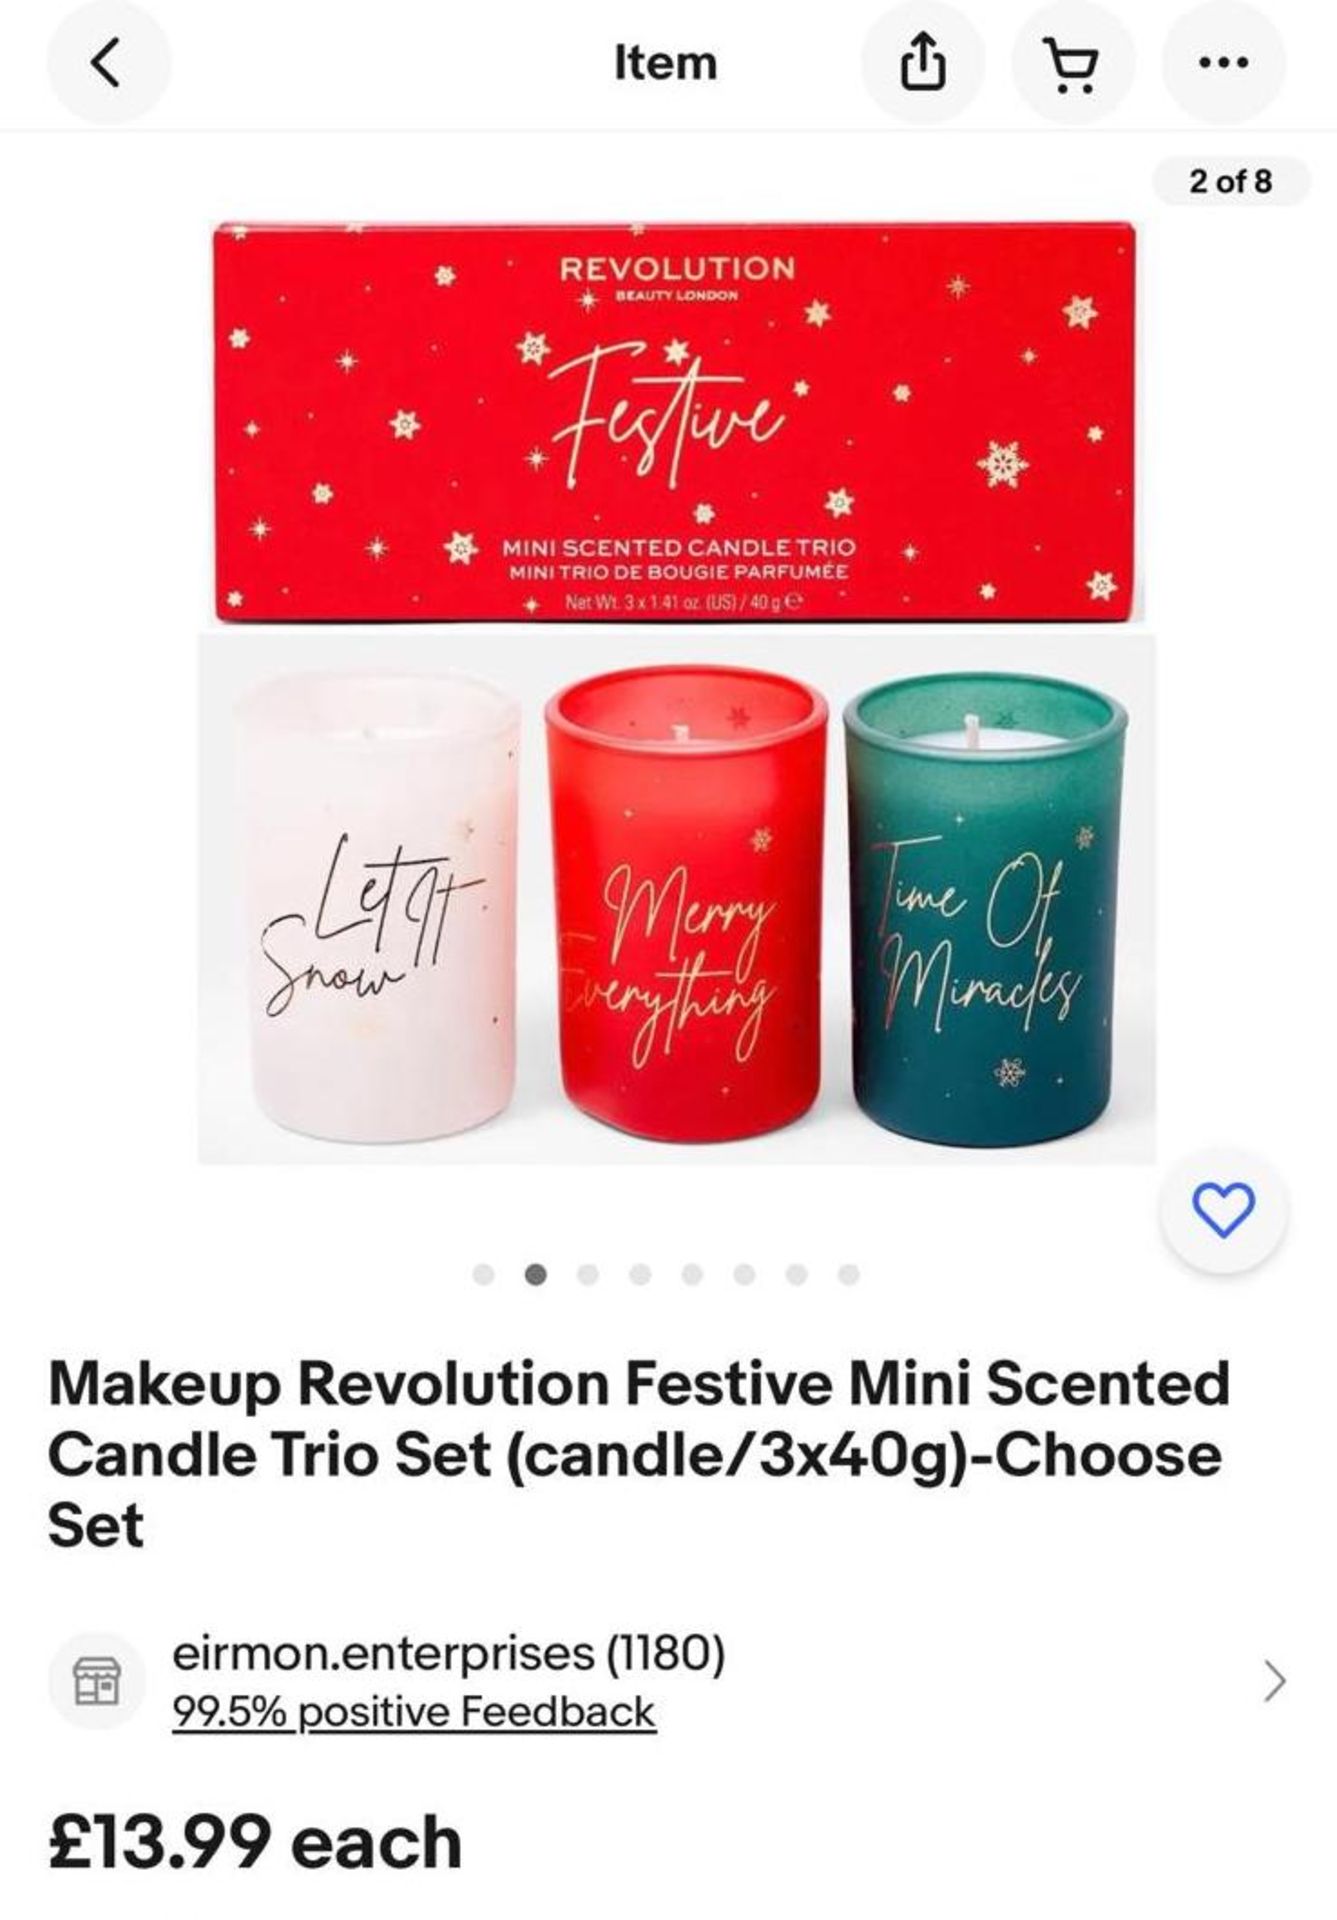 12 x Revolution Beauty London Festive Mini Scented Candle Trio Set - 3 x 40g - (NEW) - RRP Â£214.60 - Image 3 of 4